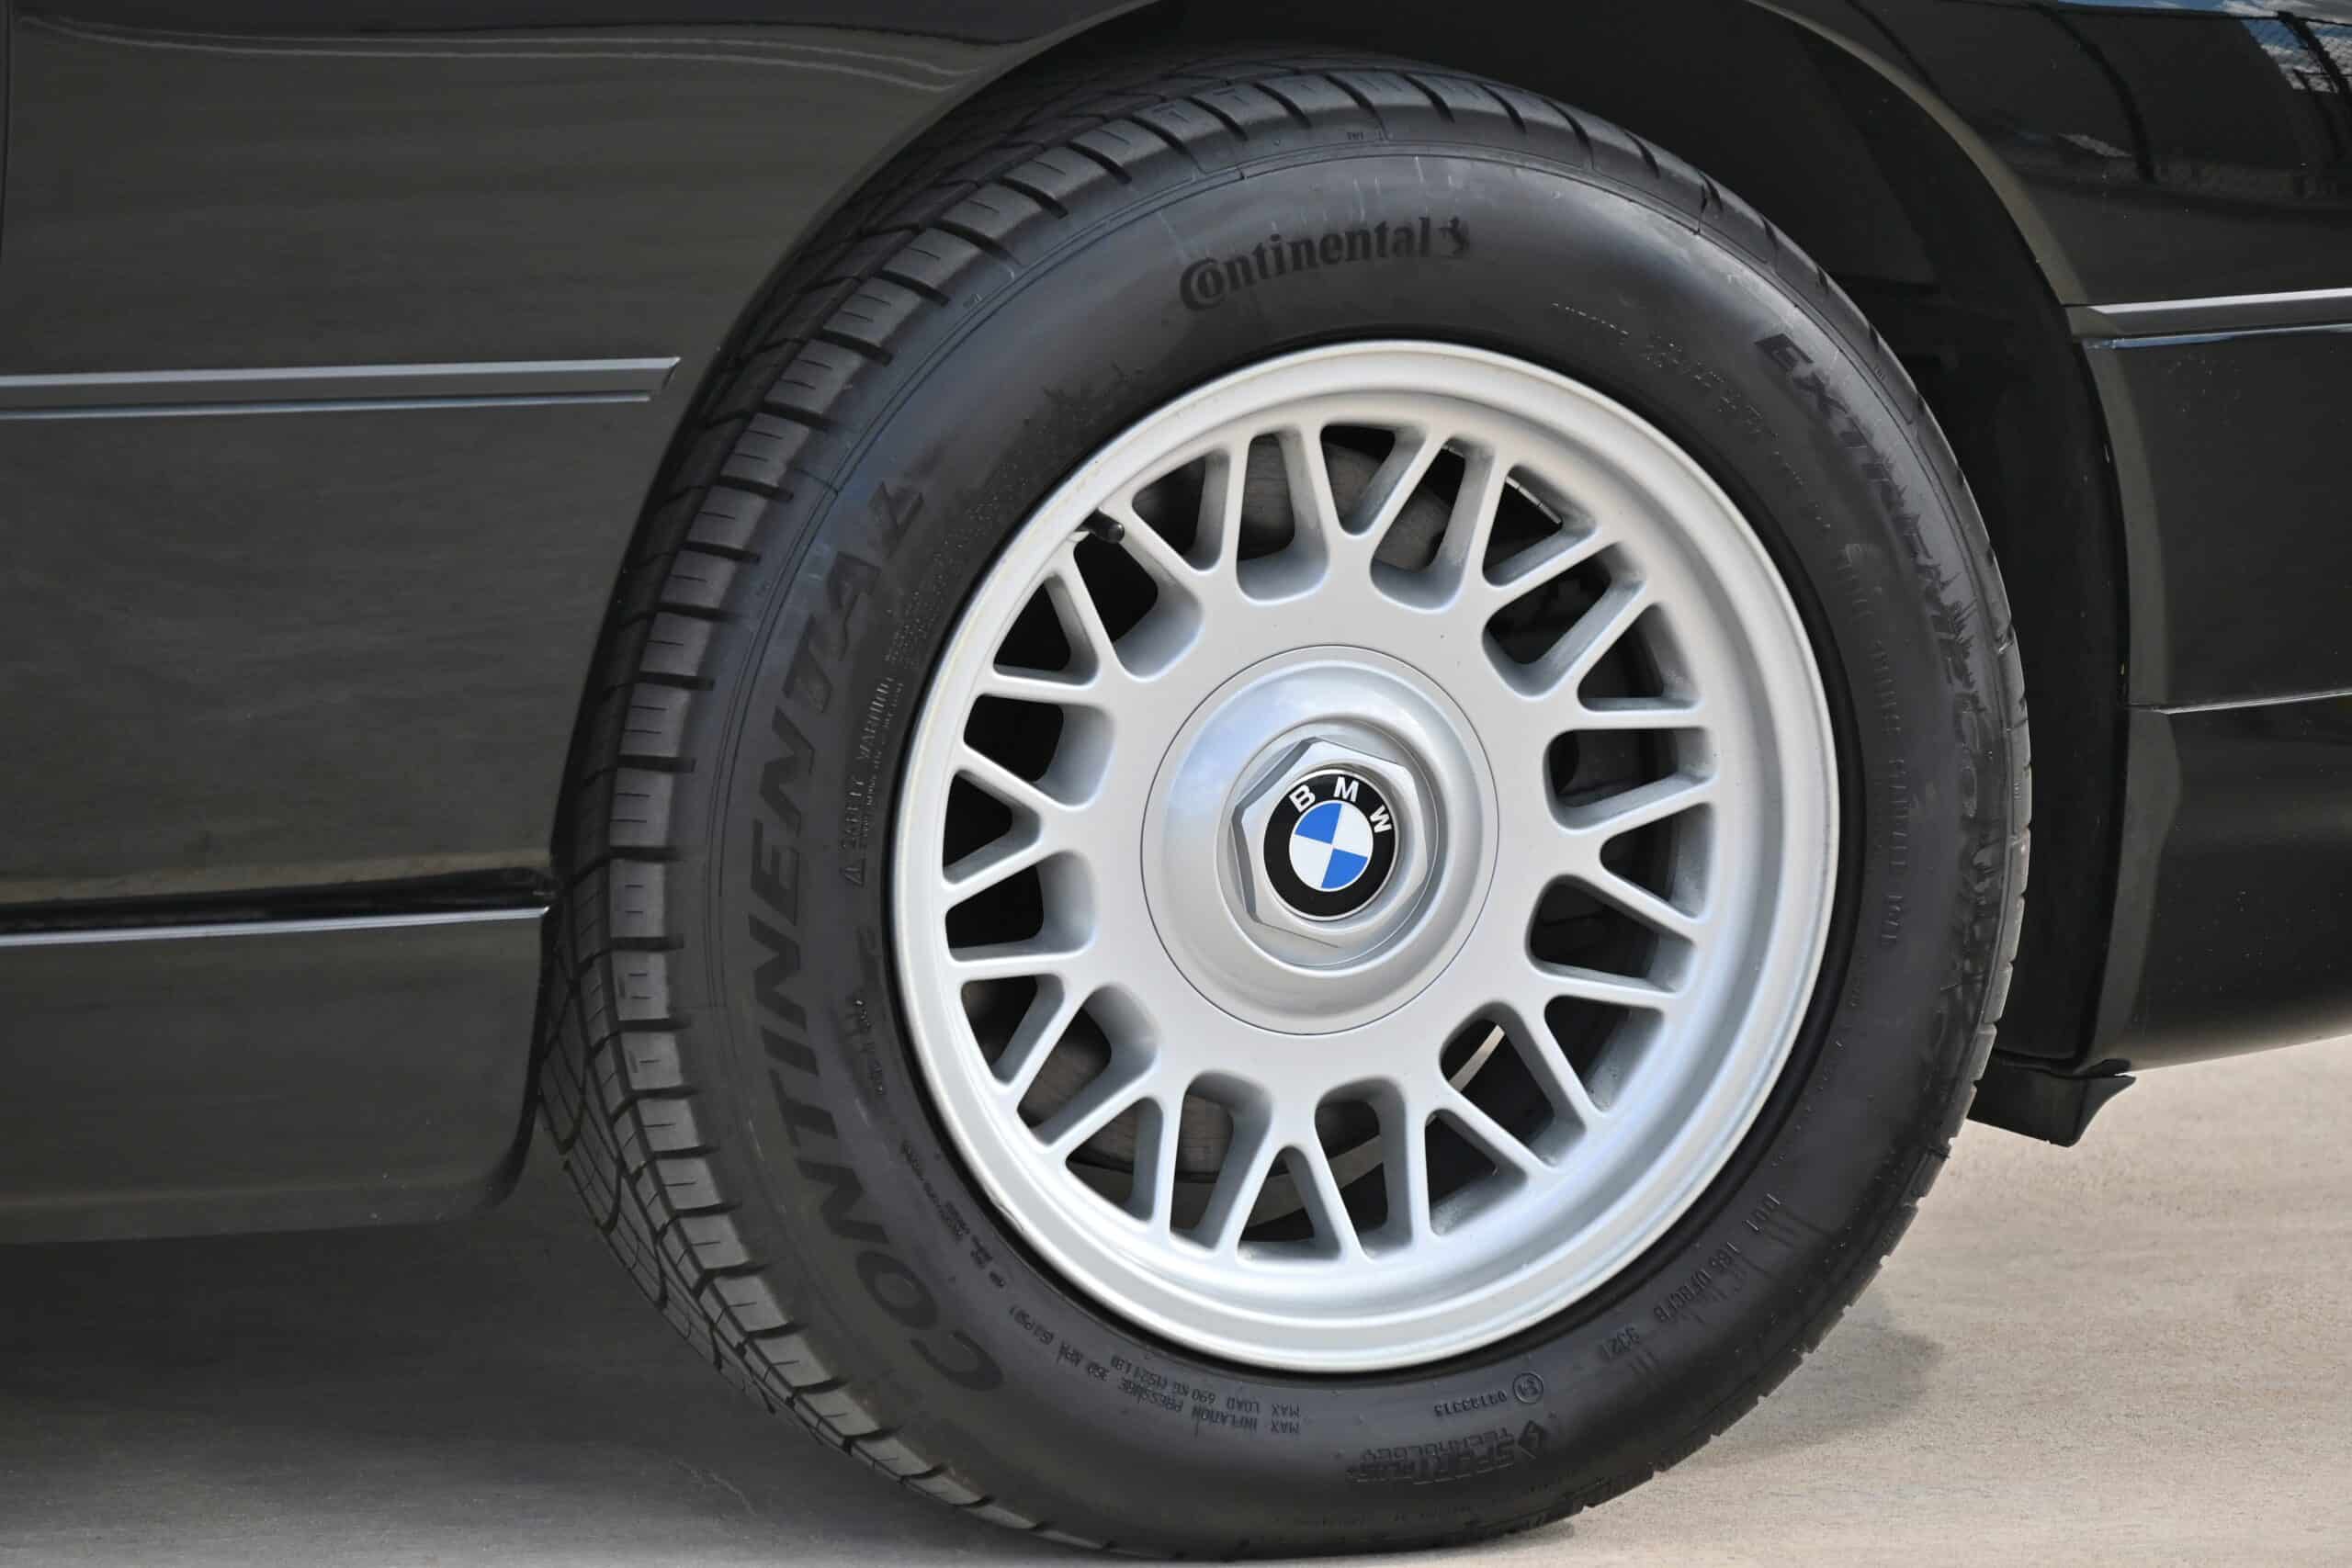 1991 BMW E31 850i 1 Family Owned-LOW 60K MILES – Stock – Excellent condition-Recent $7,000 Service